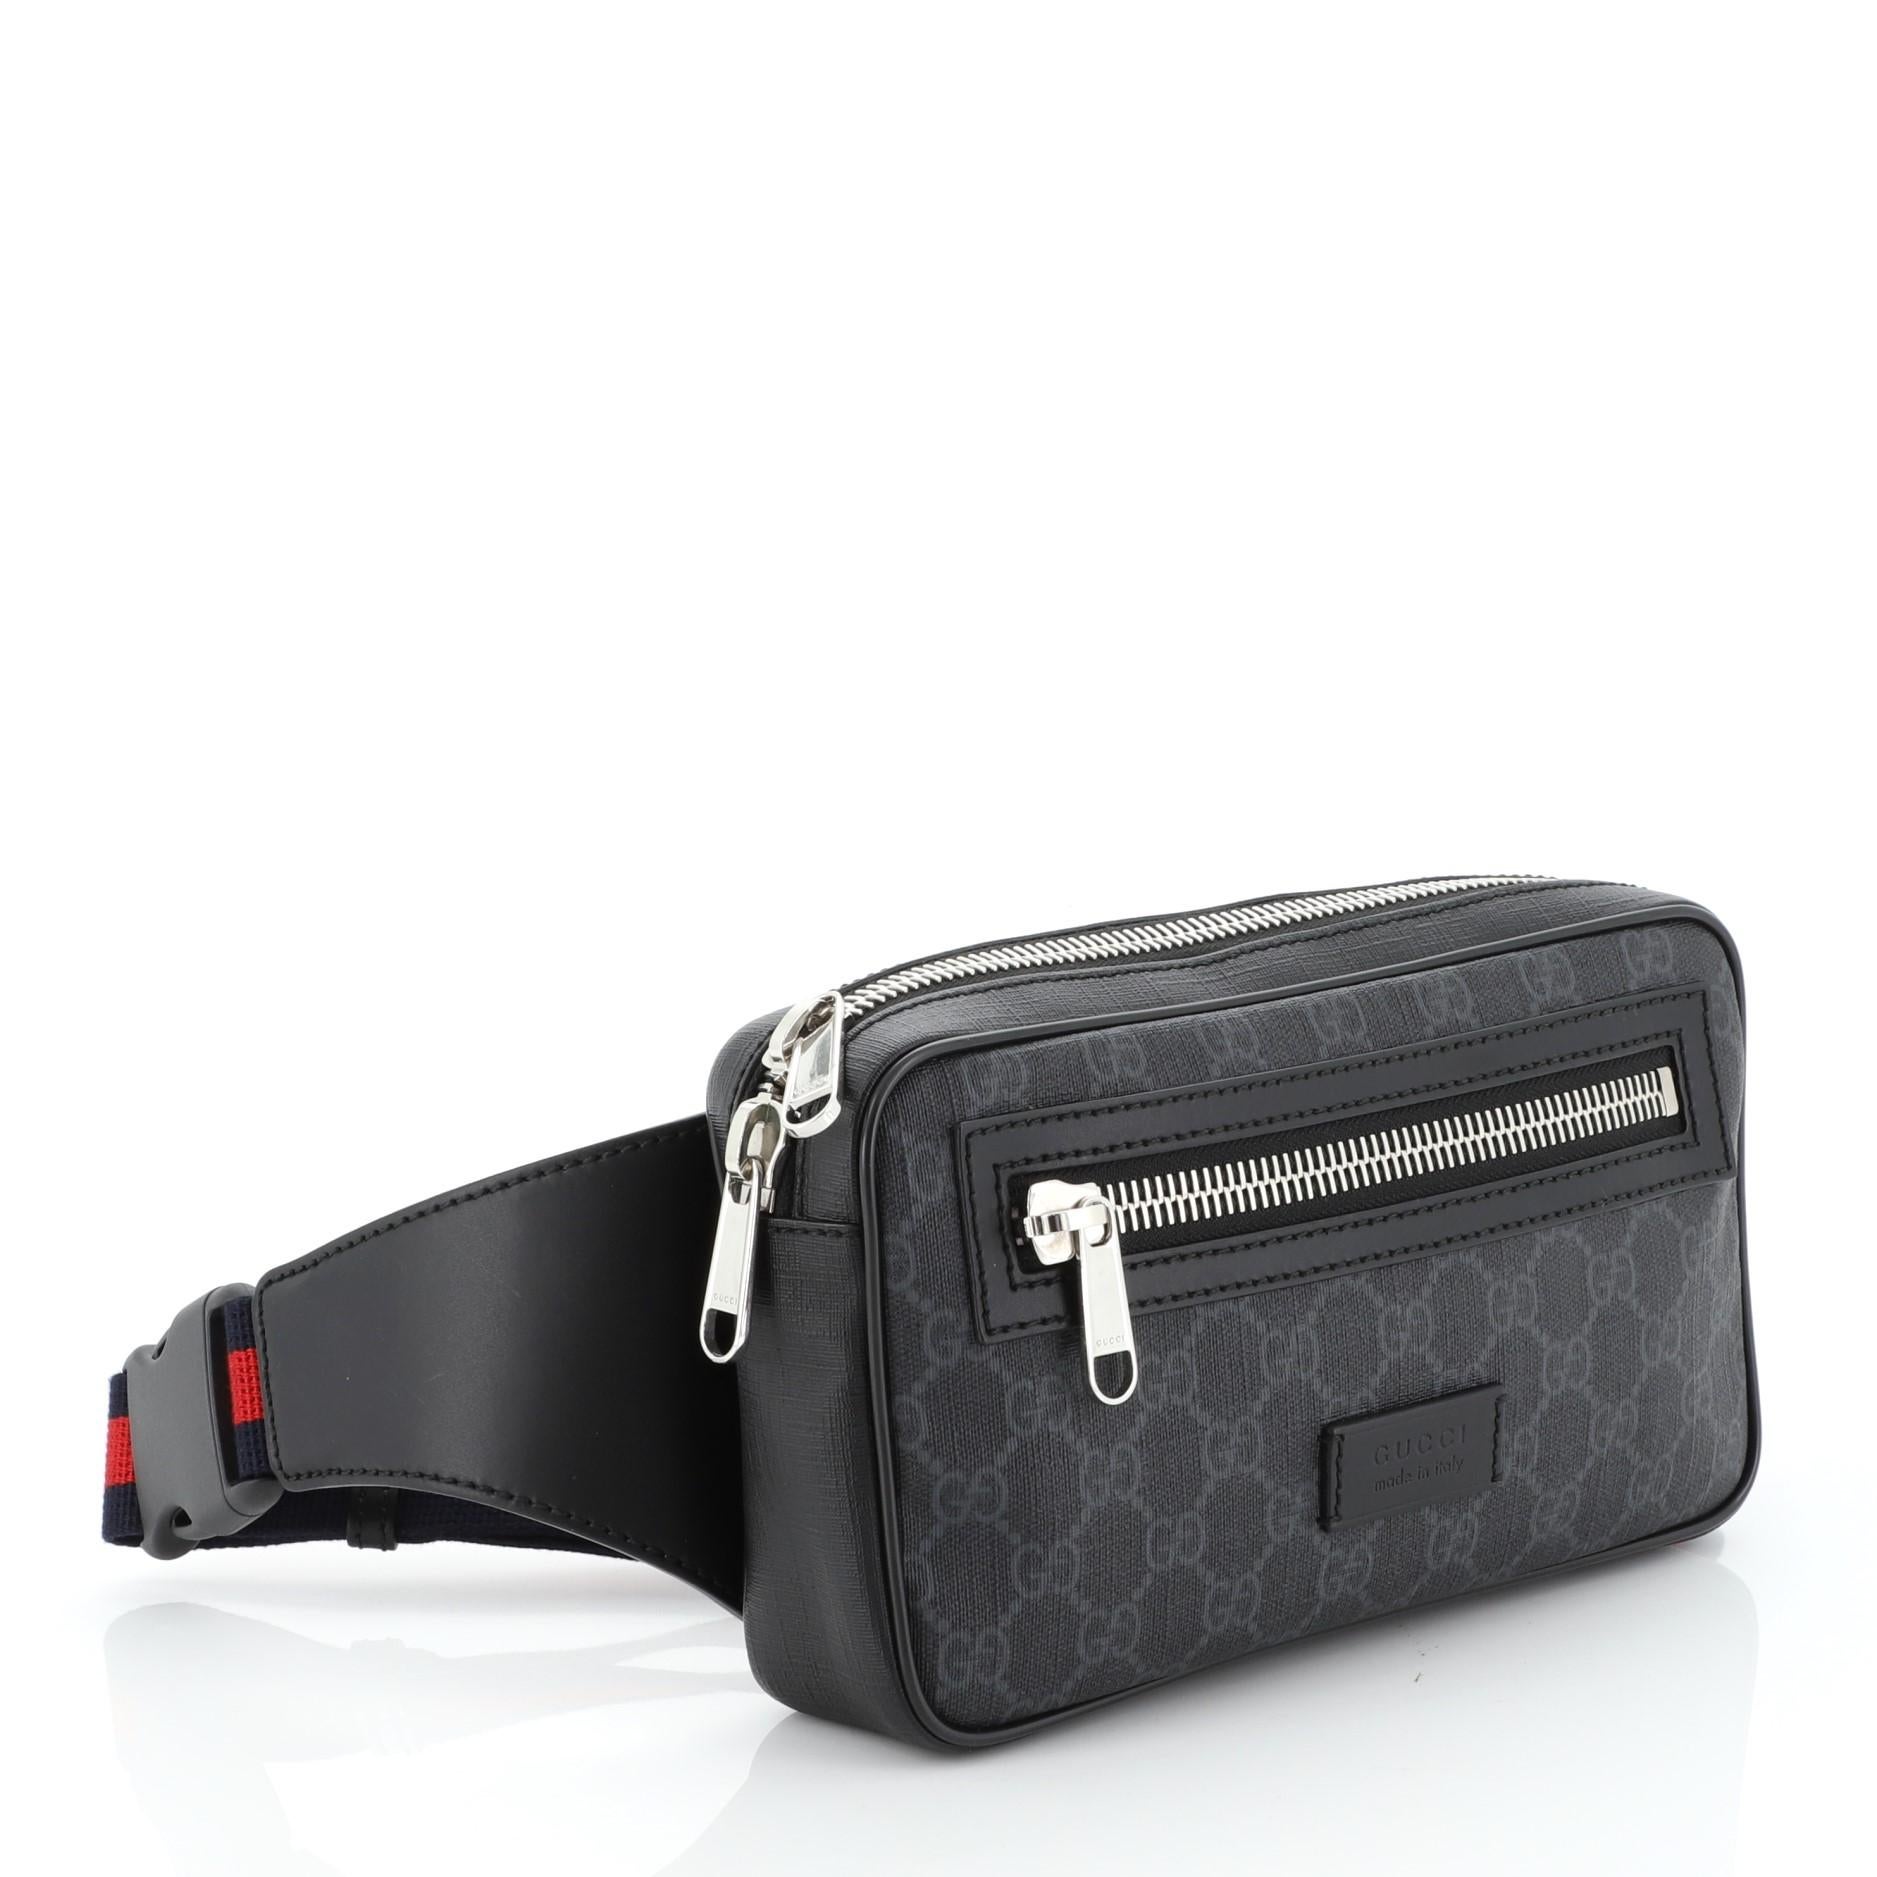 This Gucci Soft Zip Belt Bag GG Coated Canvas Small, crafted in black GG coated canvas, features an adjustable web belt strap, leather trim, exterior front zip pocket and silver-tone hardware. Its zip closure opens to a black fabric interior with